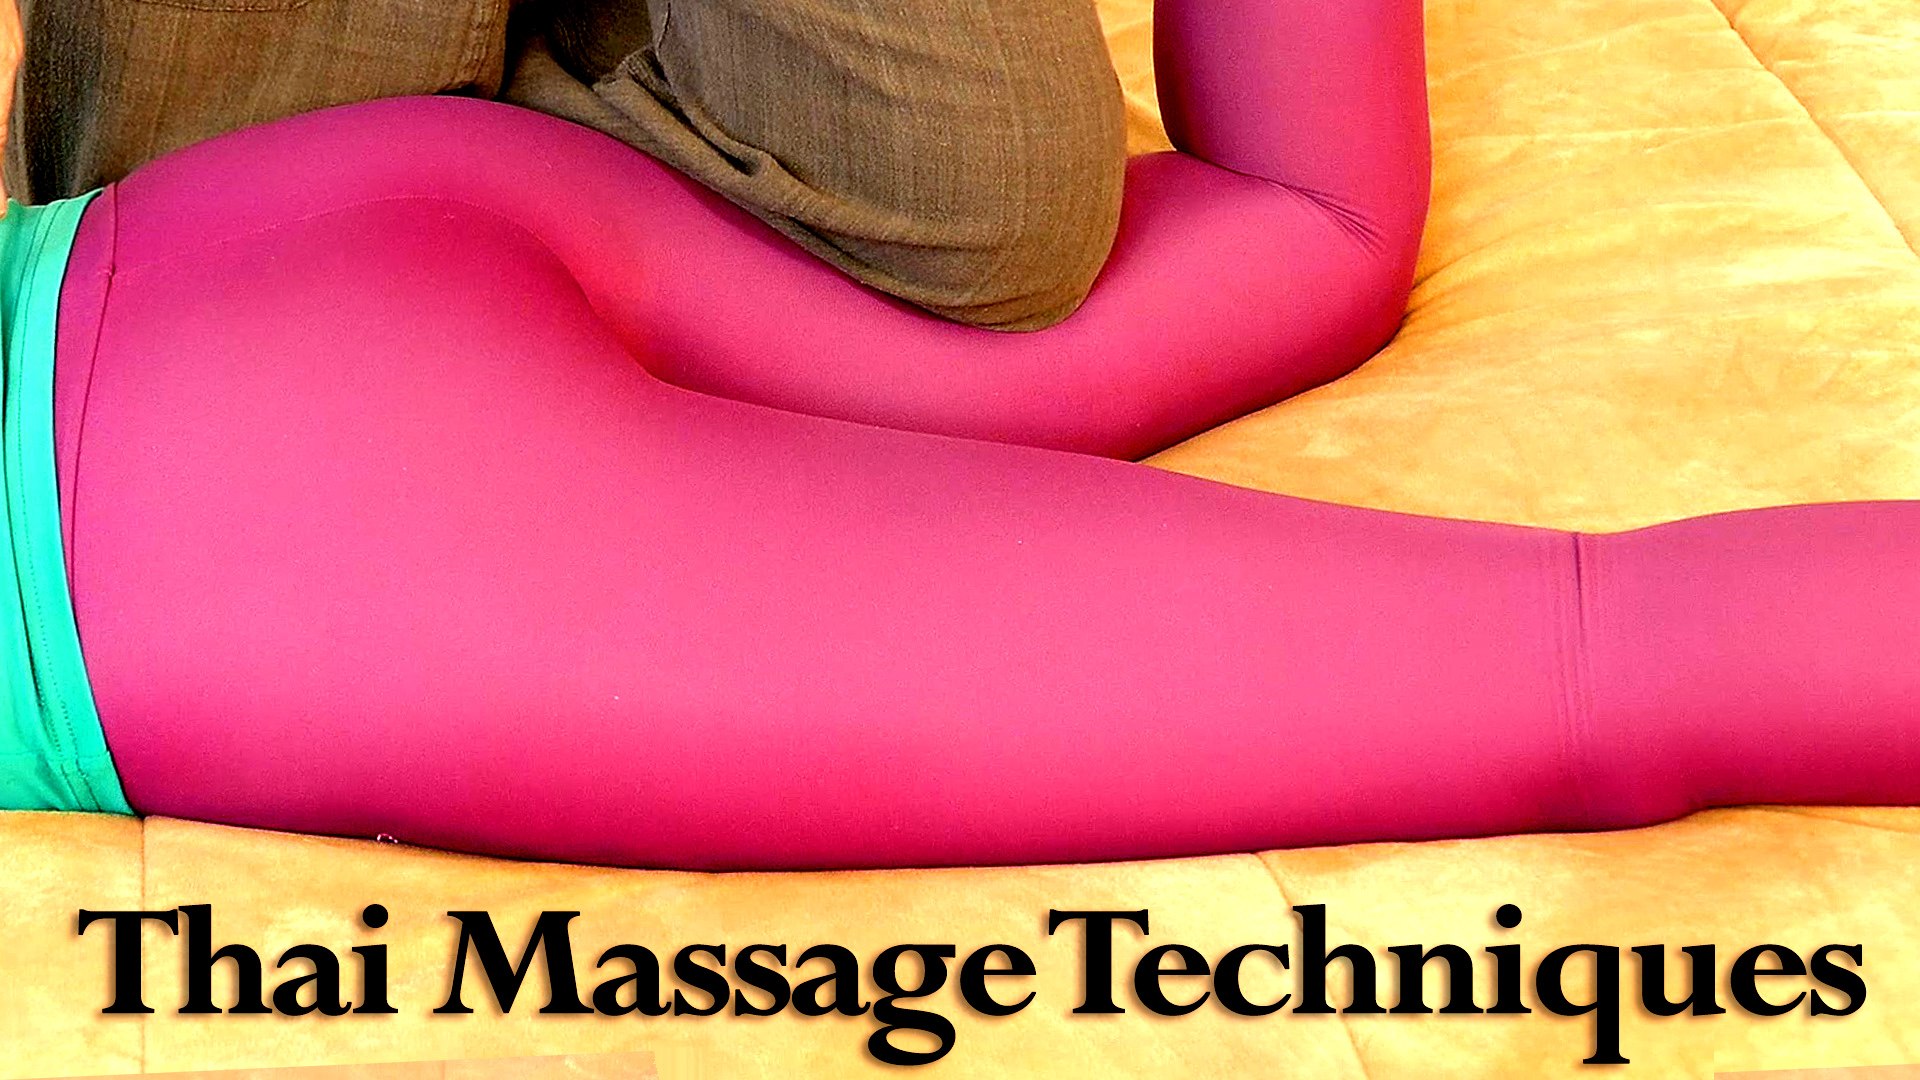 Thai Massage for Butt, Thighs & Feet - How to Techniques | Relaxing Music  ASMR Voice - video Dailymotion